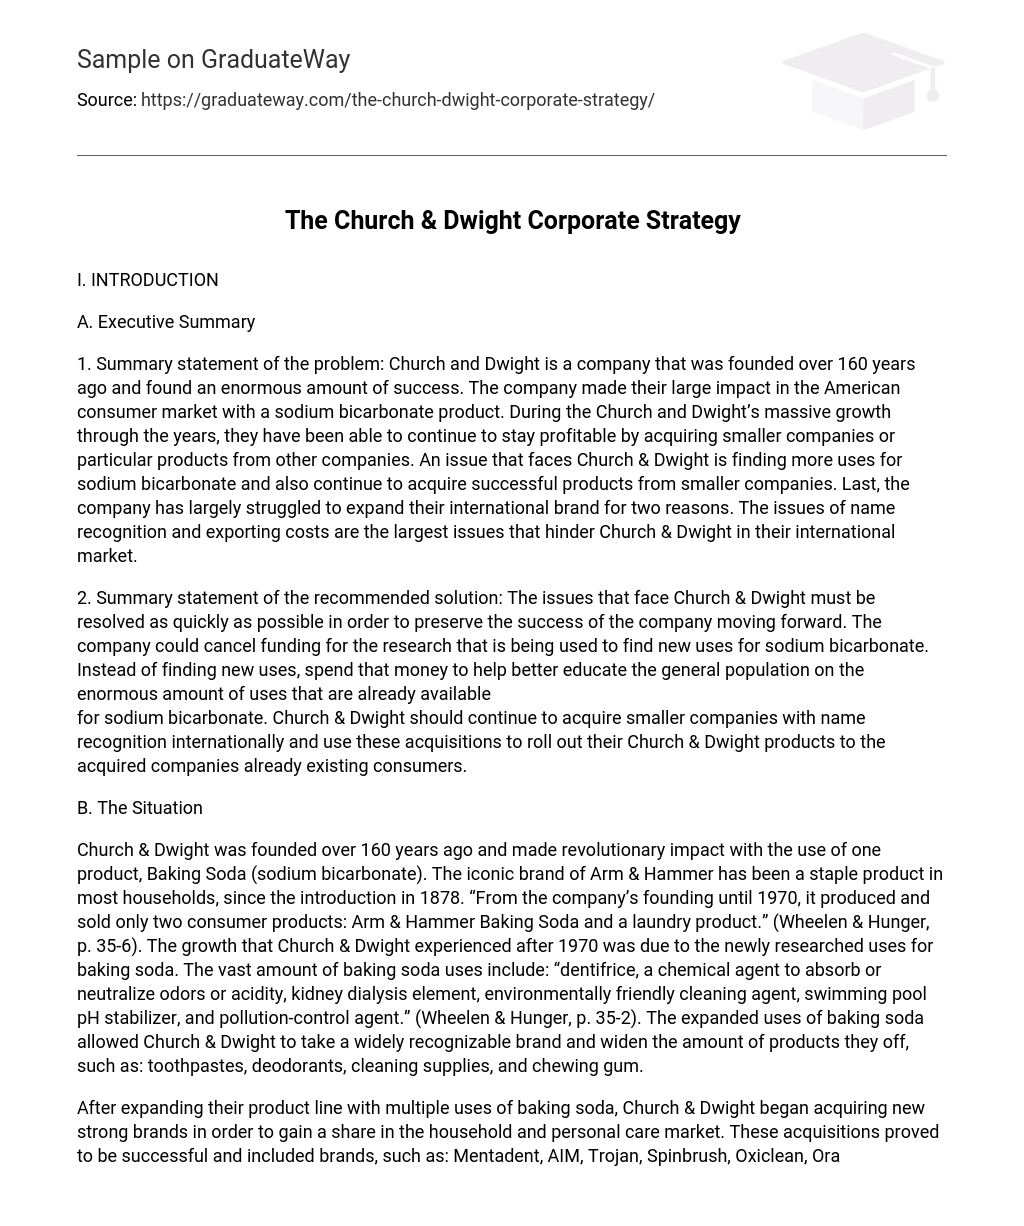 The Church & Dwight Corporate Strategy